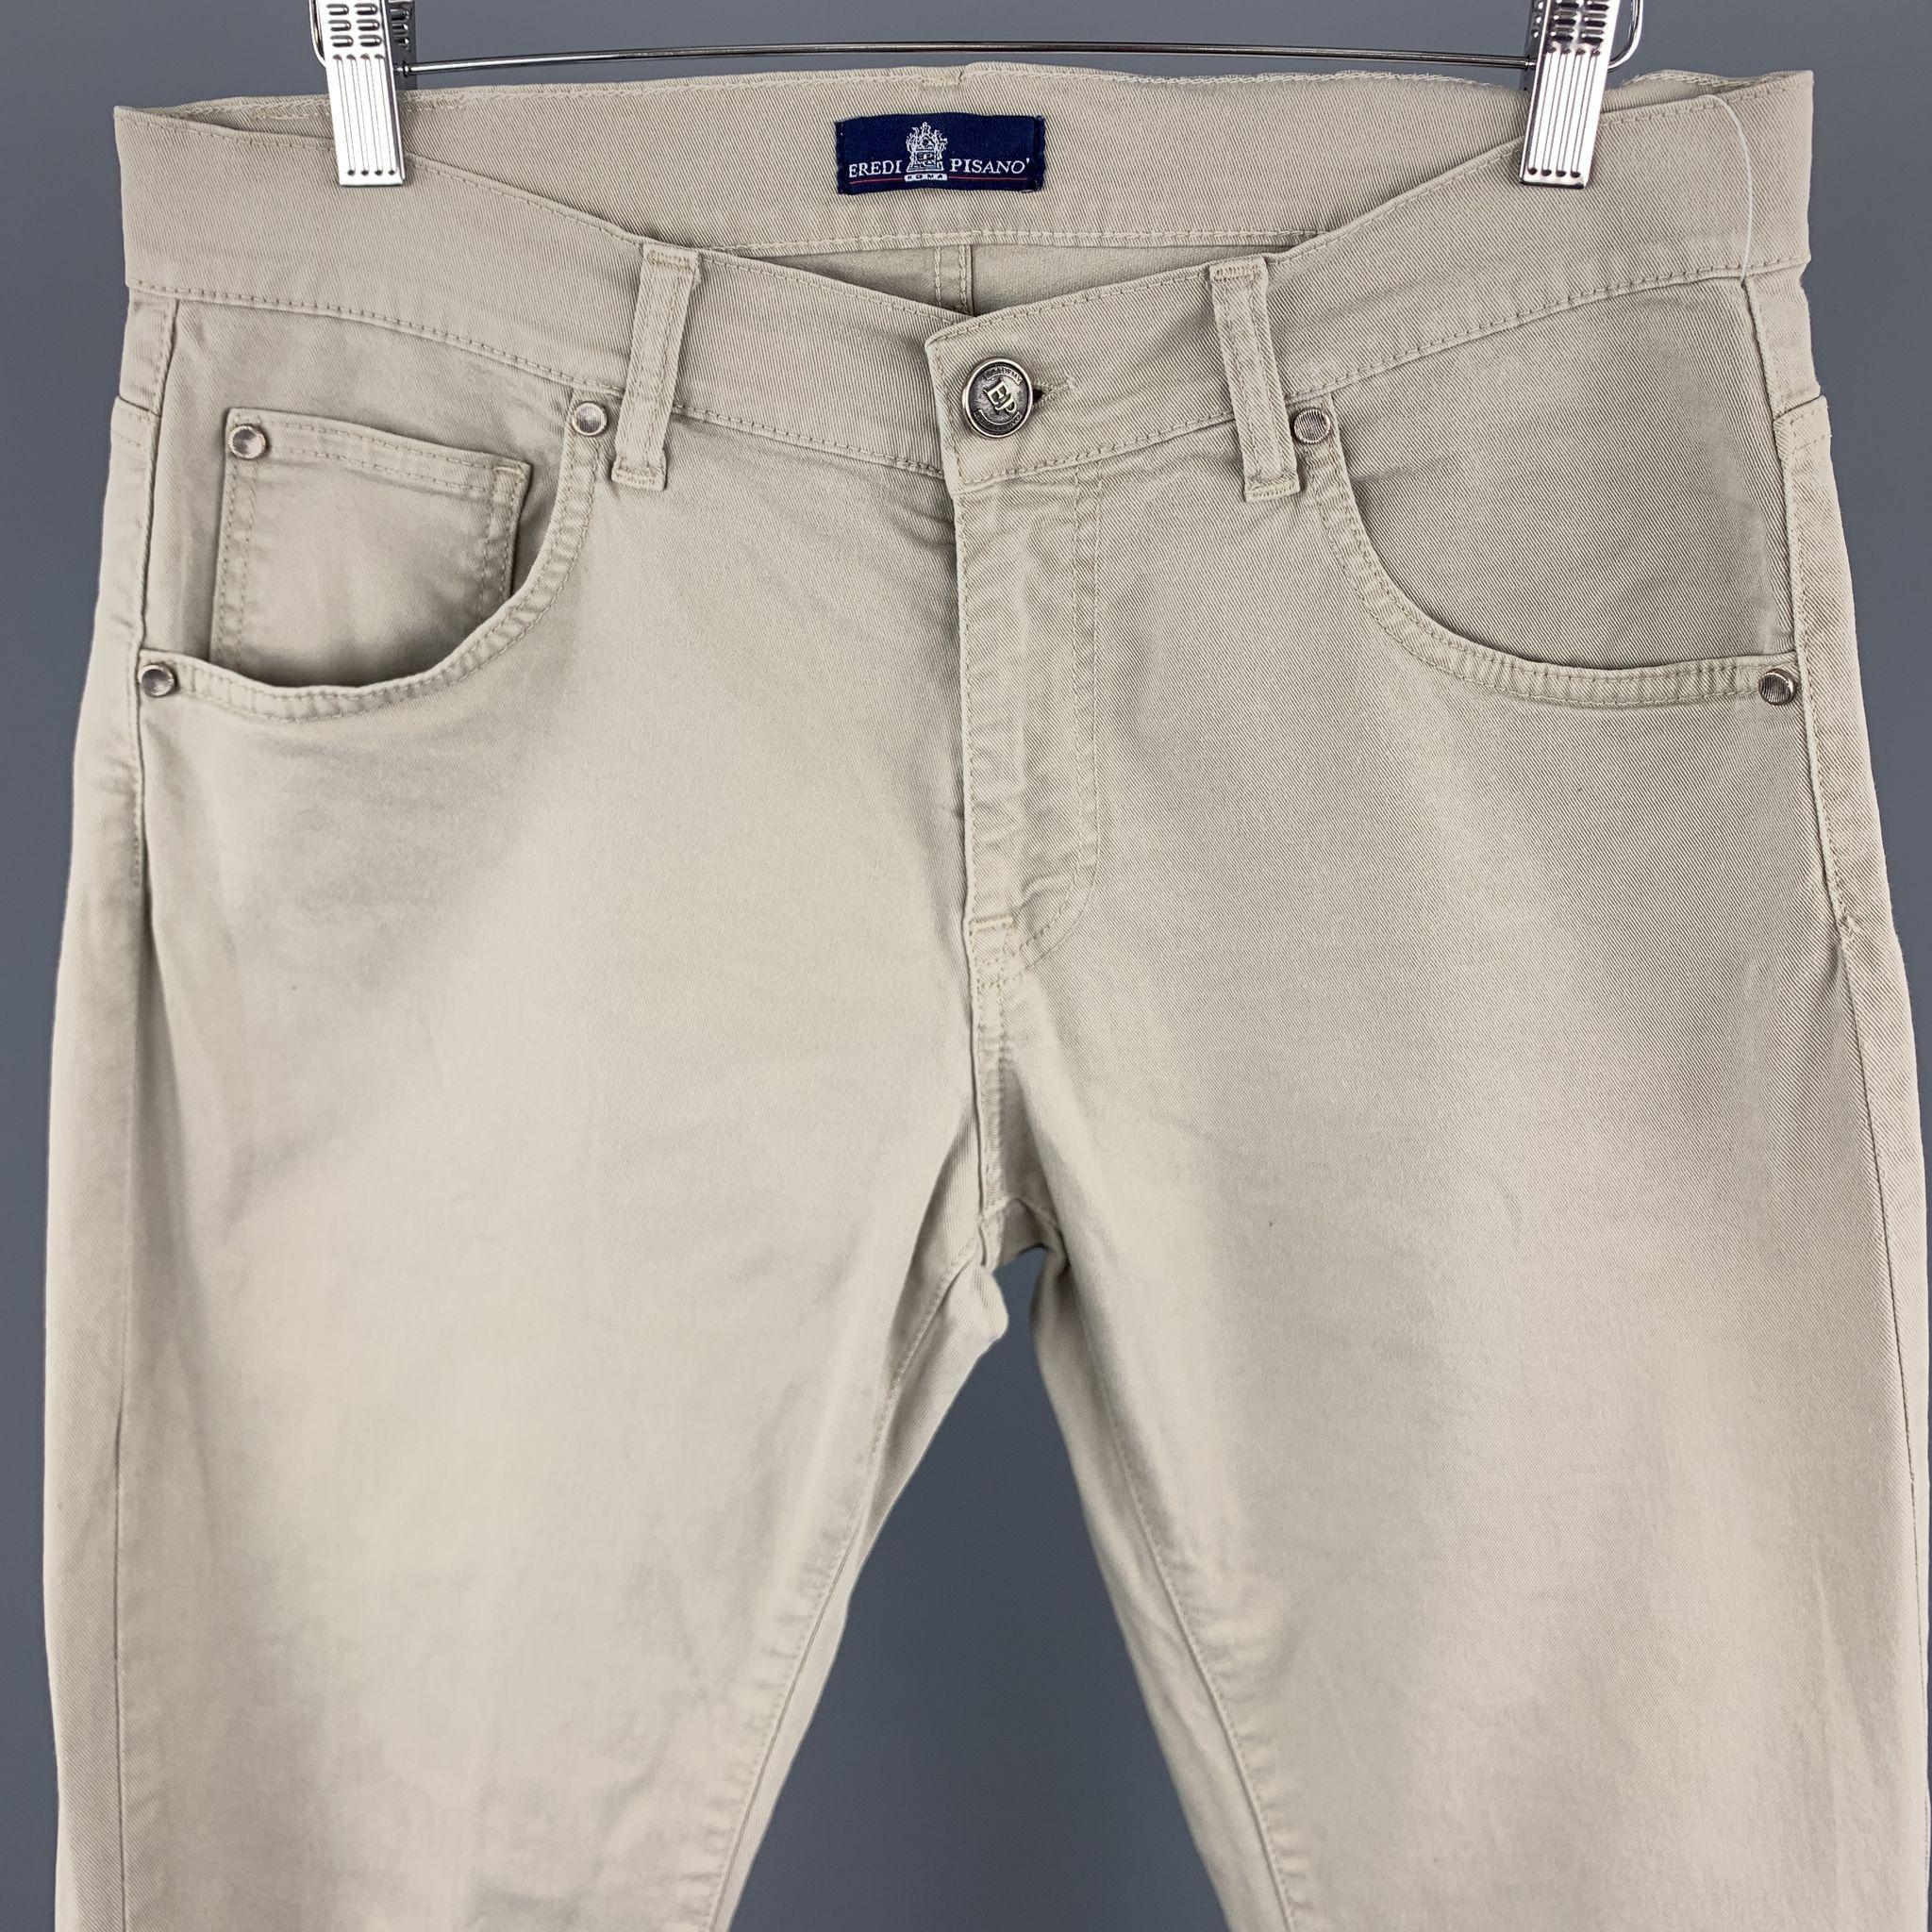 EREDI PISANO casual pants comes in a khaki cotton featuring a zip fly closure. Made in Italy.

Excellent Pre-Owned Condition.
Marked: 48

Measurements:

Waist: 34 in. 
Rise: 8 in. 
Inseam: 33 in. 

SKU: 97683
Category: Casual Pants

More